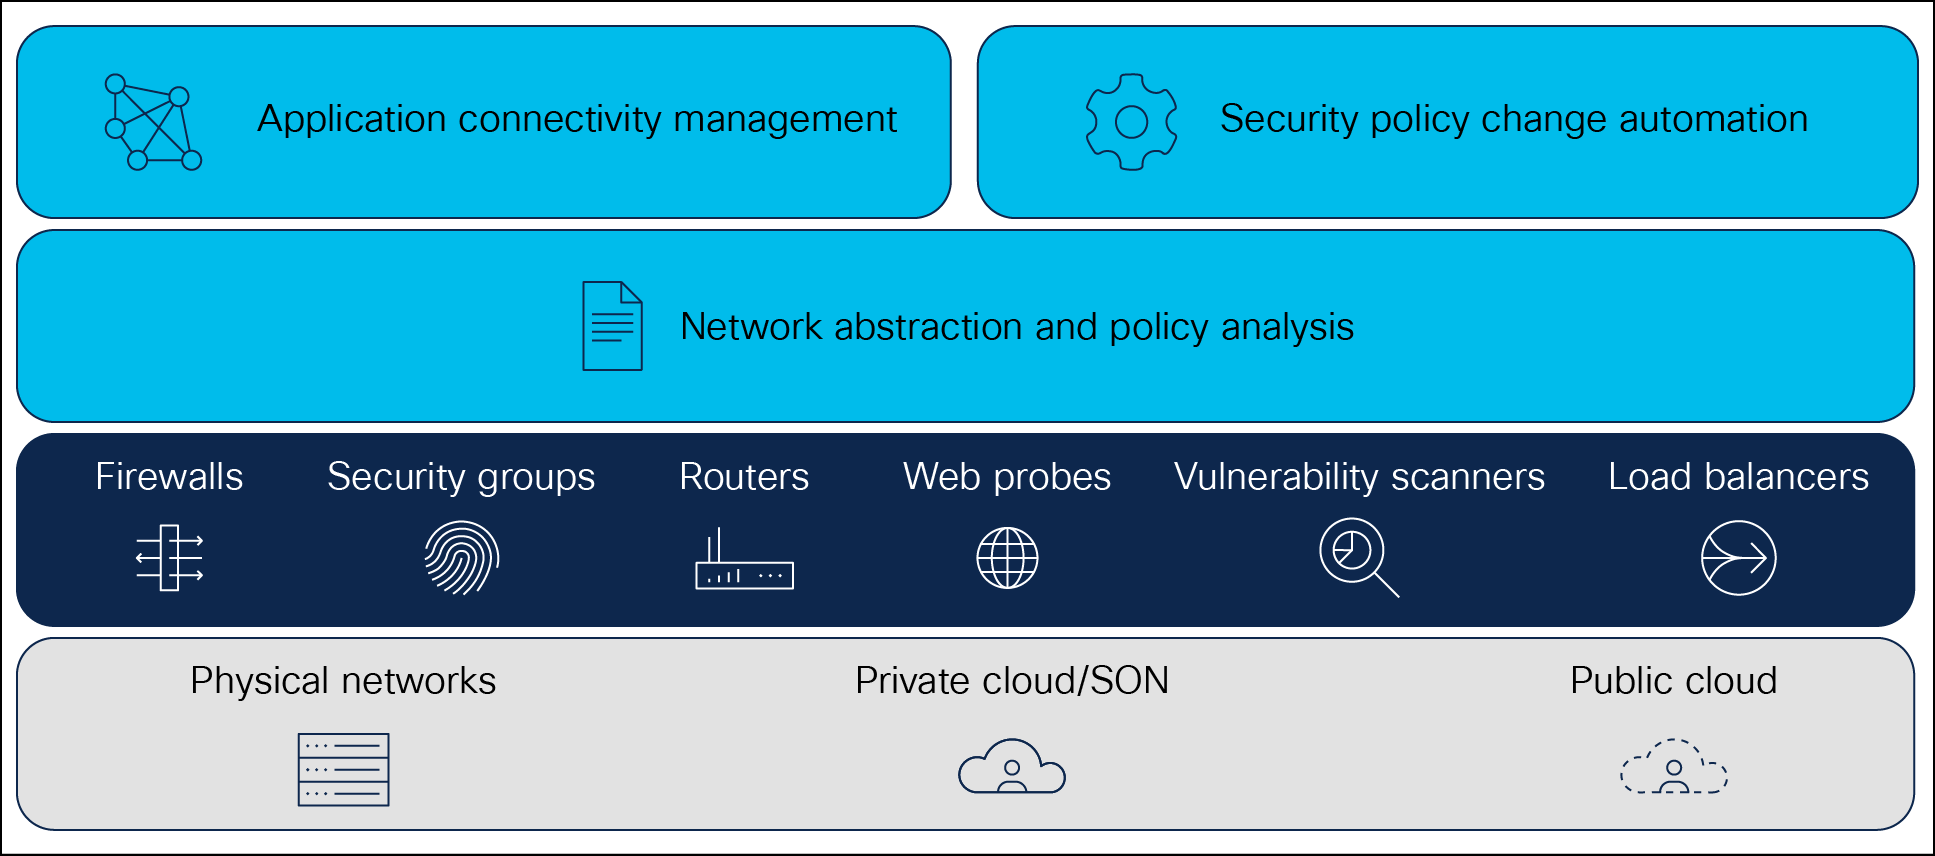 AlgoSec Security Policy Management Solution stack